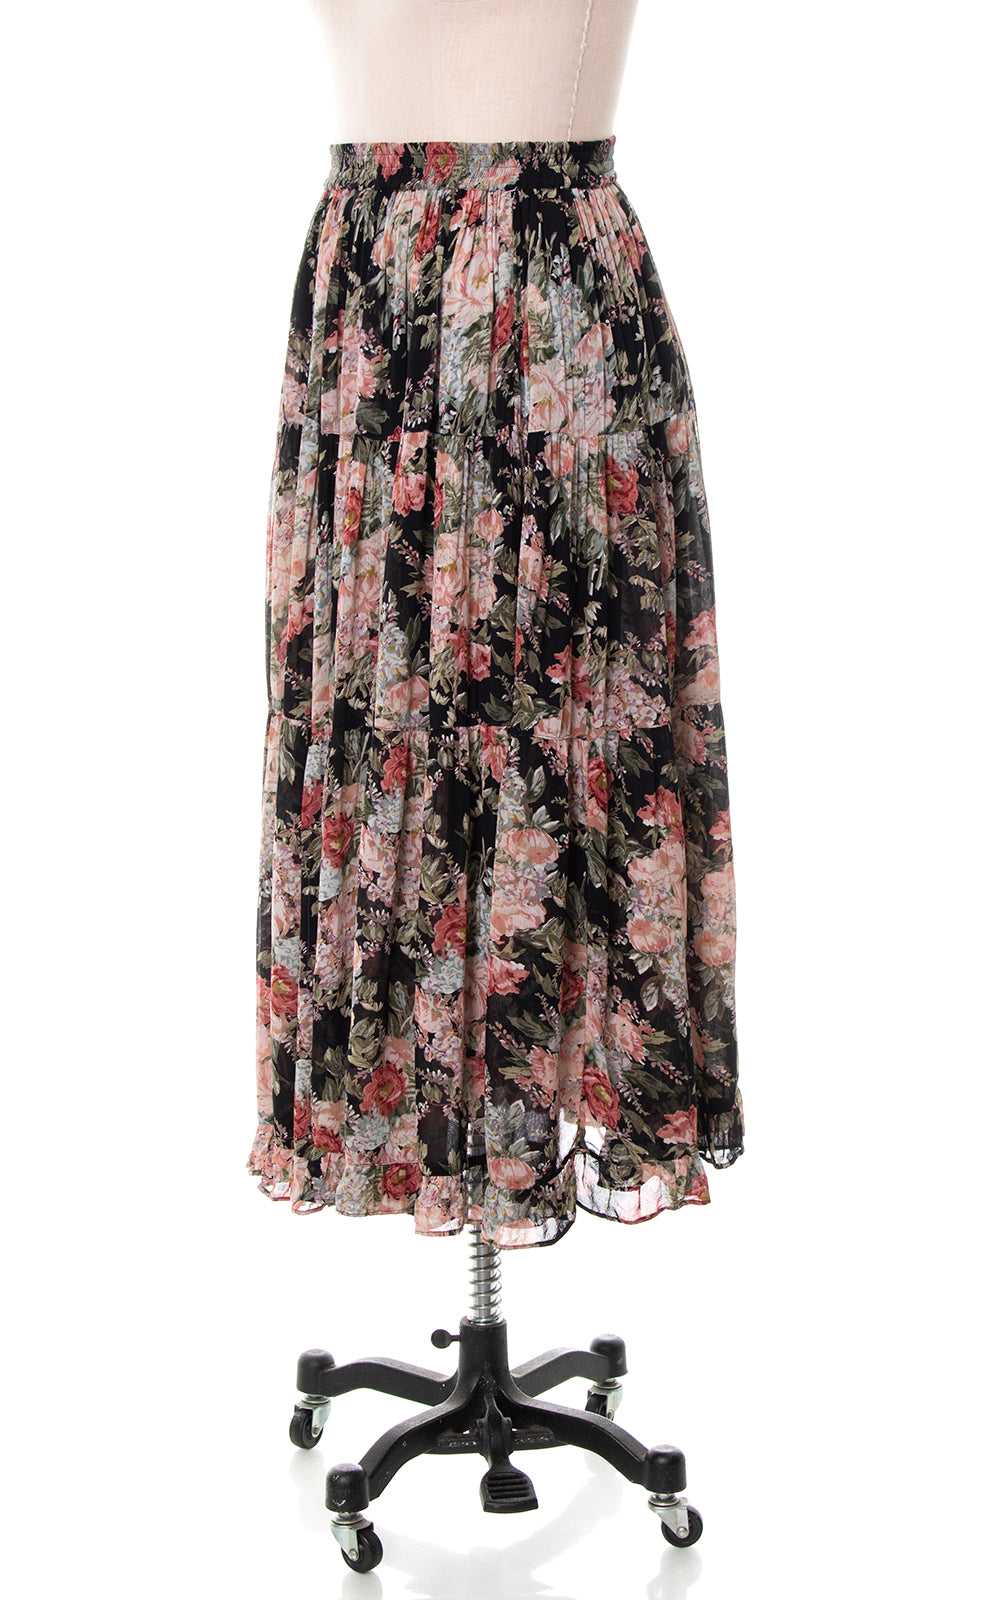 1980s Floral Rayon Tiered Skirt | small/medium - image 4